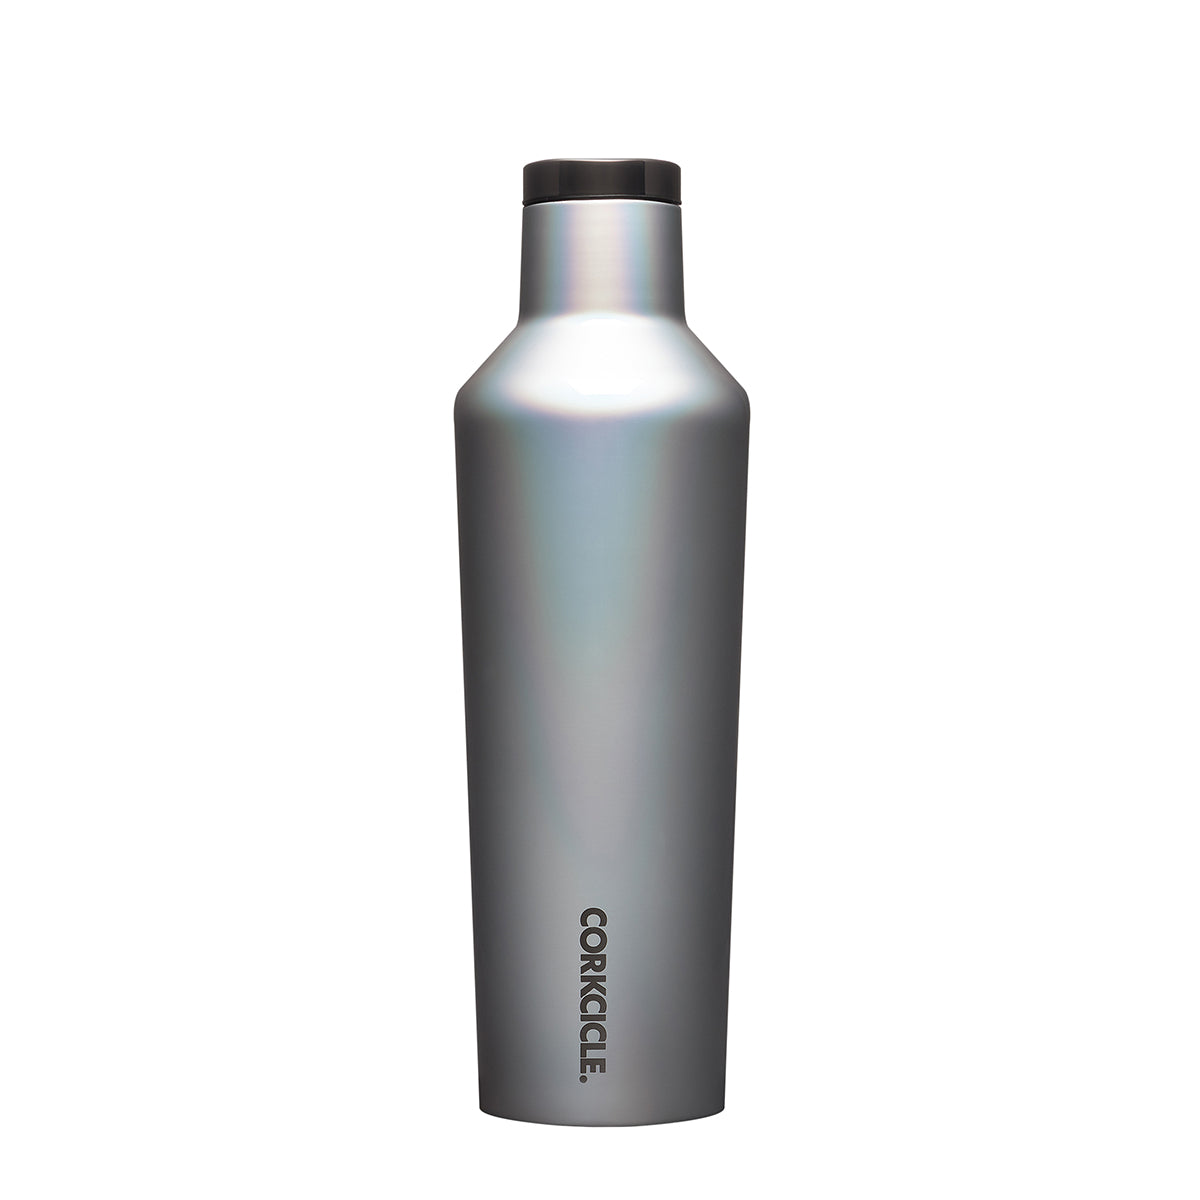 CORKCICLE Insulated Canteen 16oz (475ml) - Prismatic